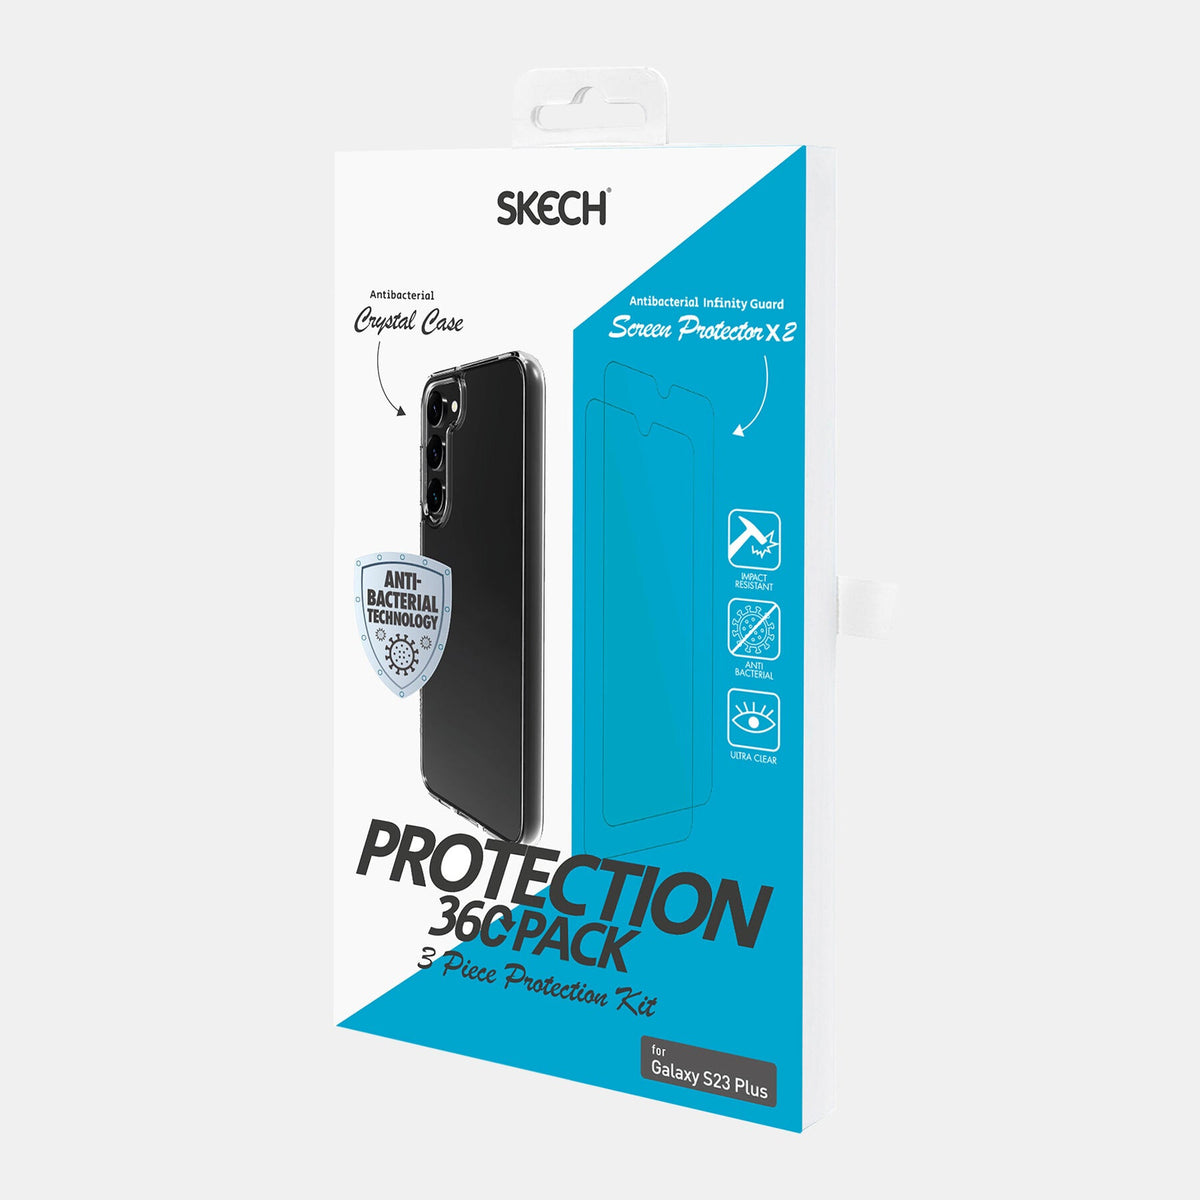 Skech Protection 360 Protection Kit for Galaxy S23 Plus in Transparent